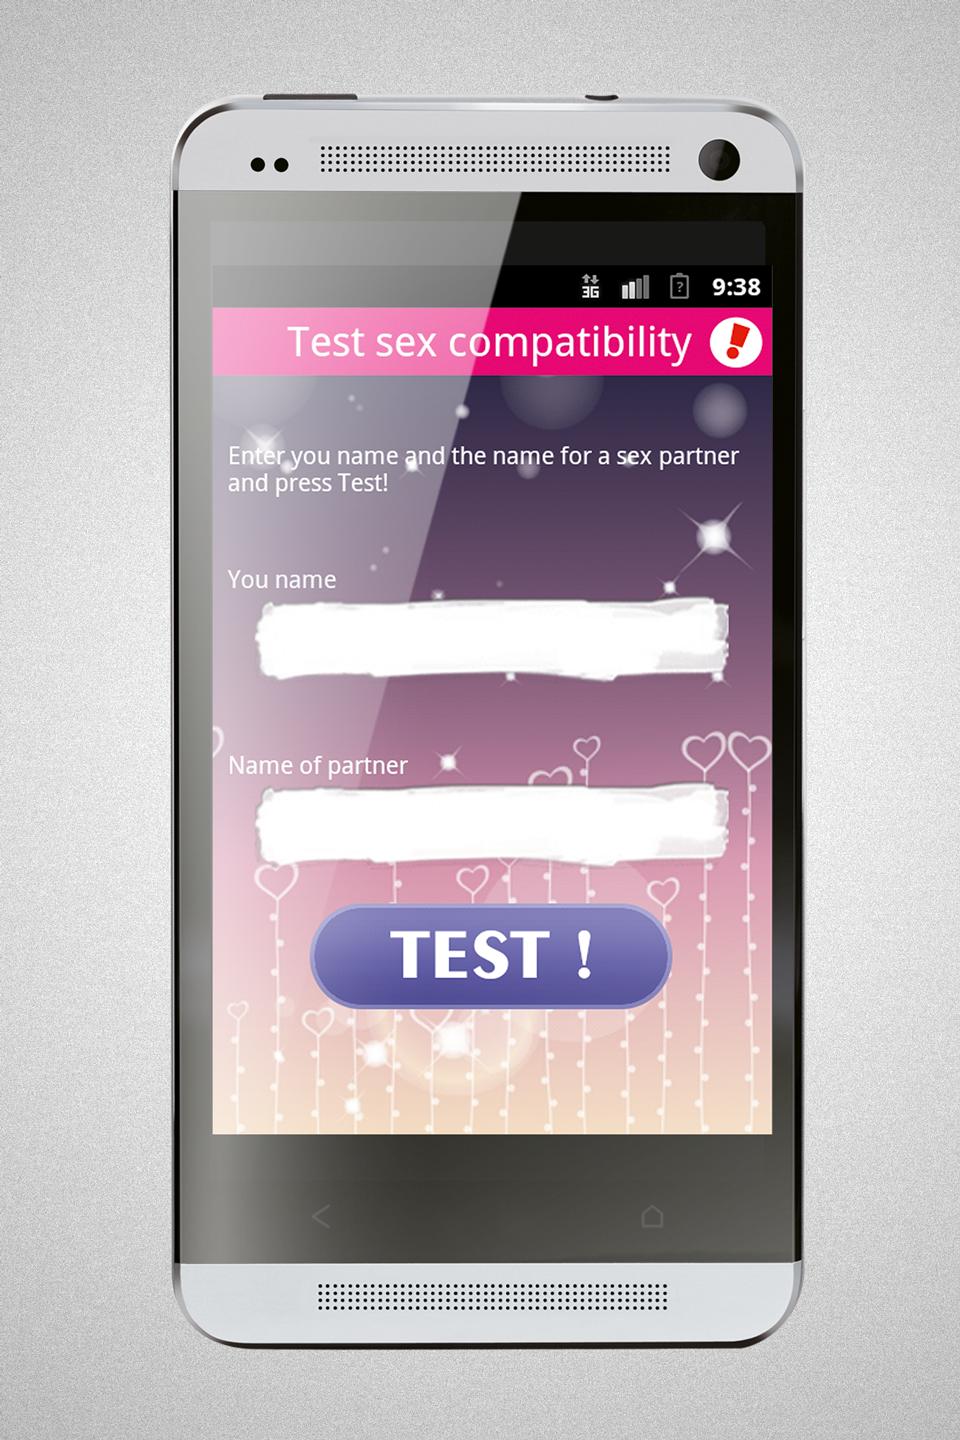 Test for sex compatibility screenshot 2.